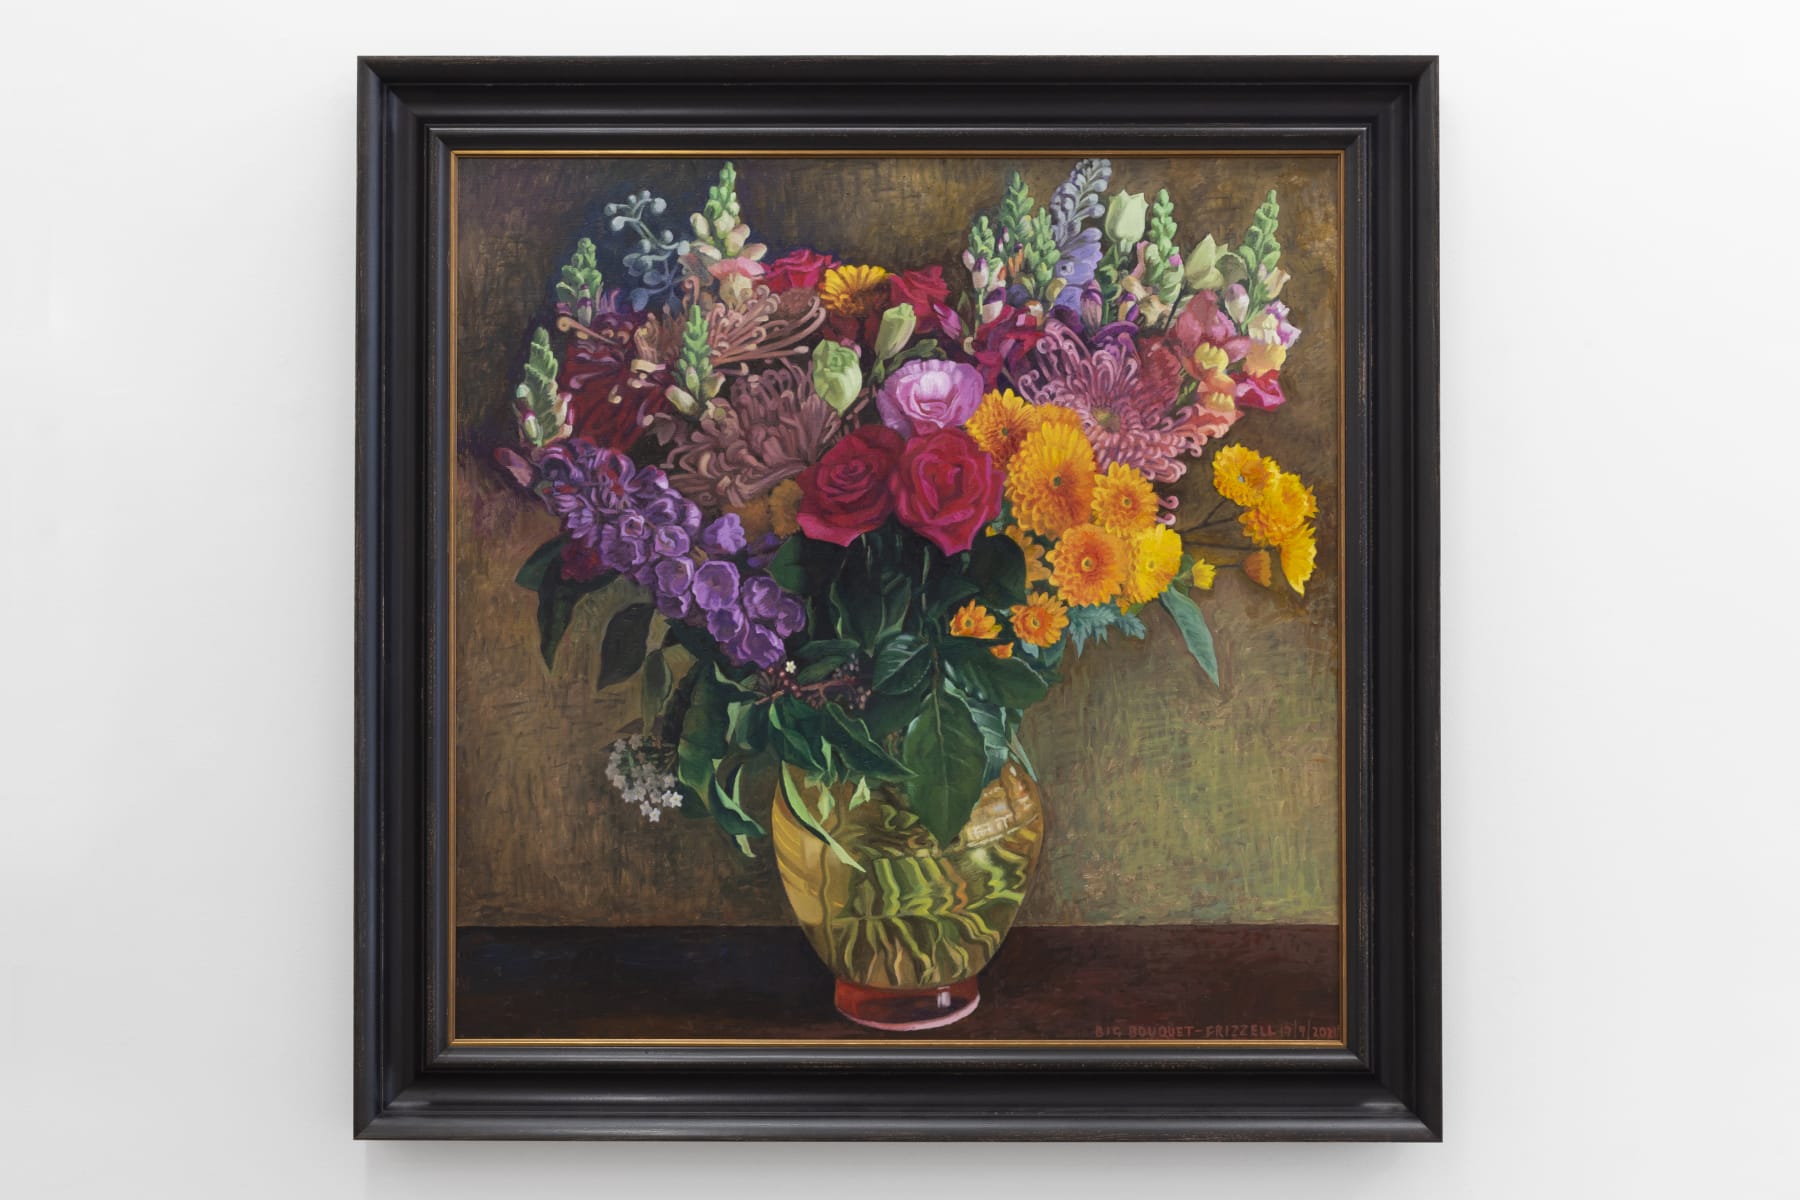 Dick FRIZZELL, Big Bouquet, 2021